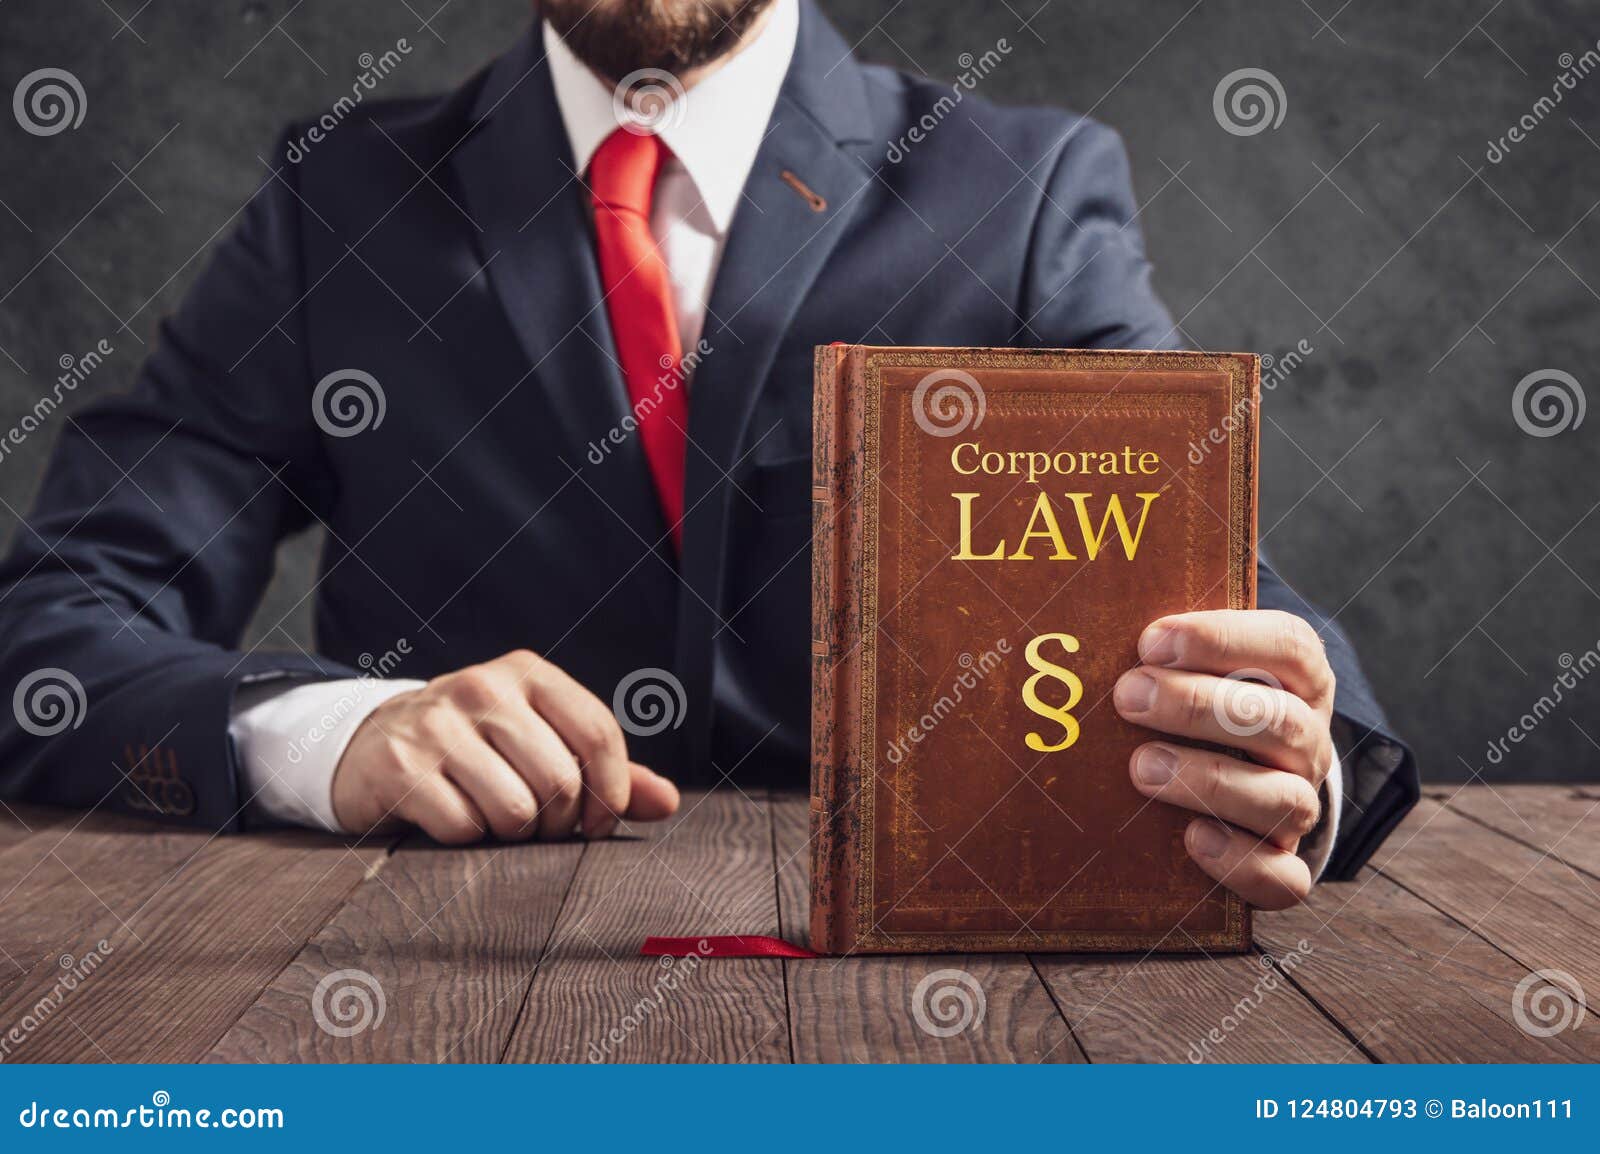 lawyer shows statute book of law